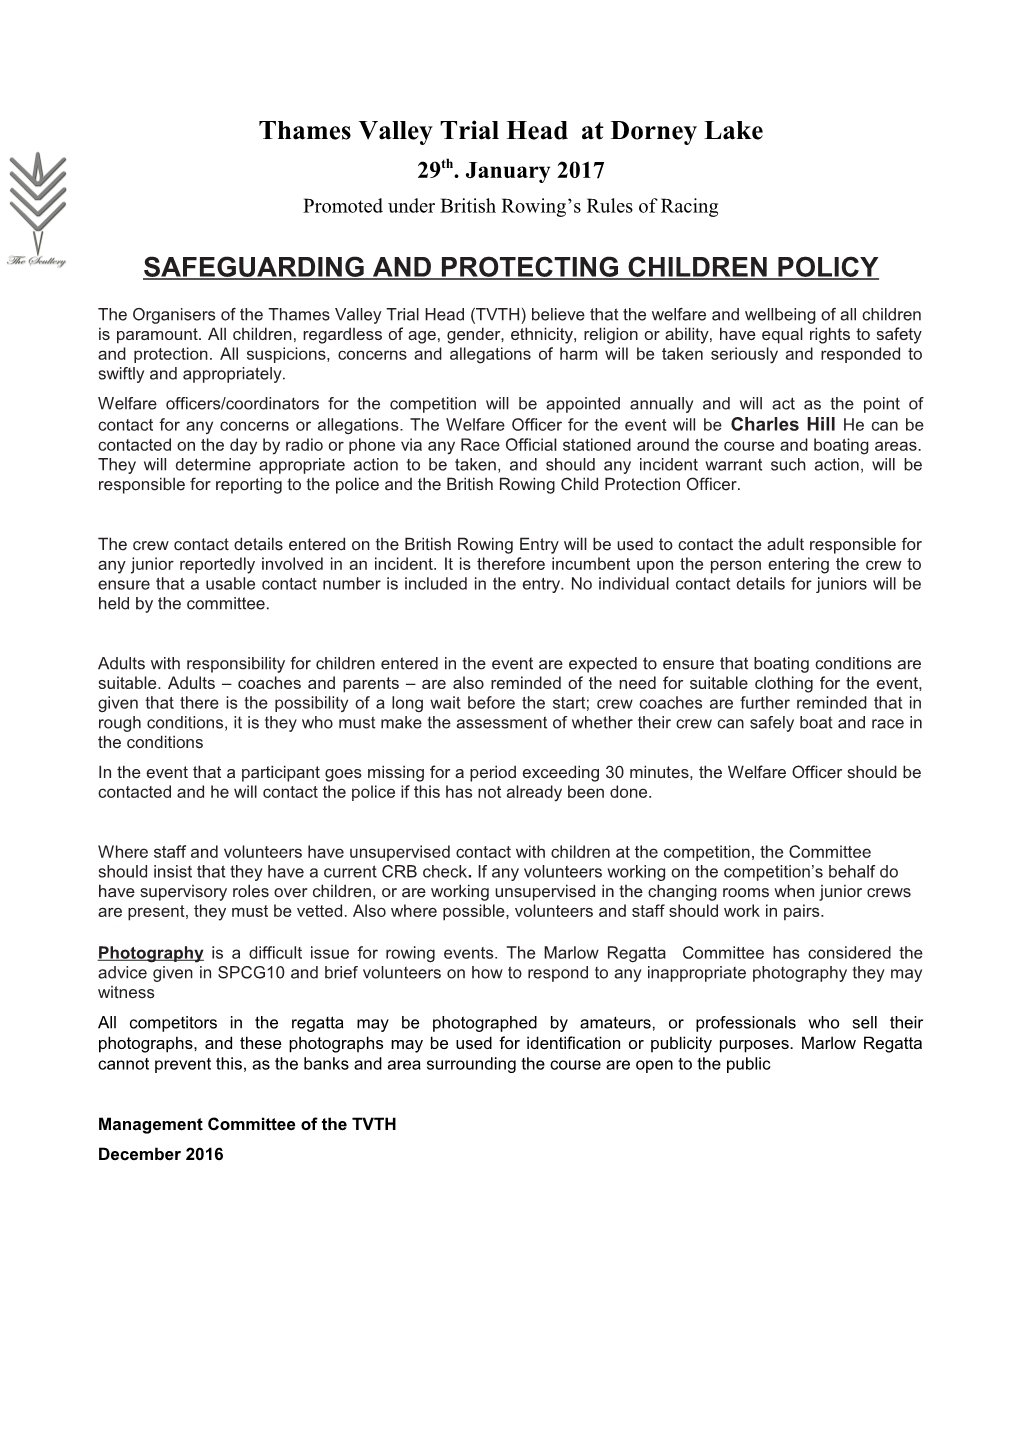 Safeguarding and Protecting Children Policy